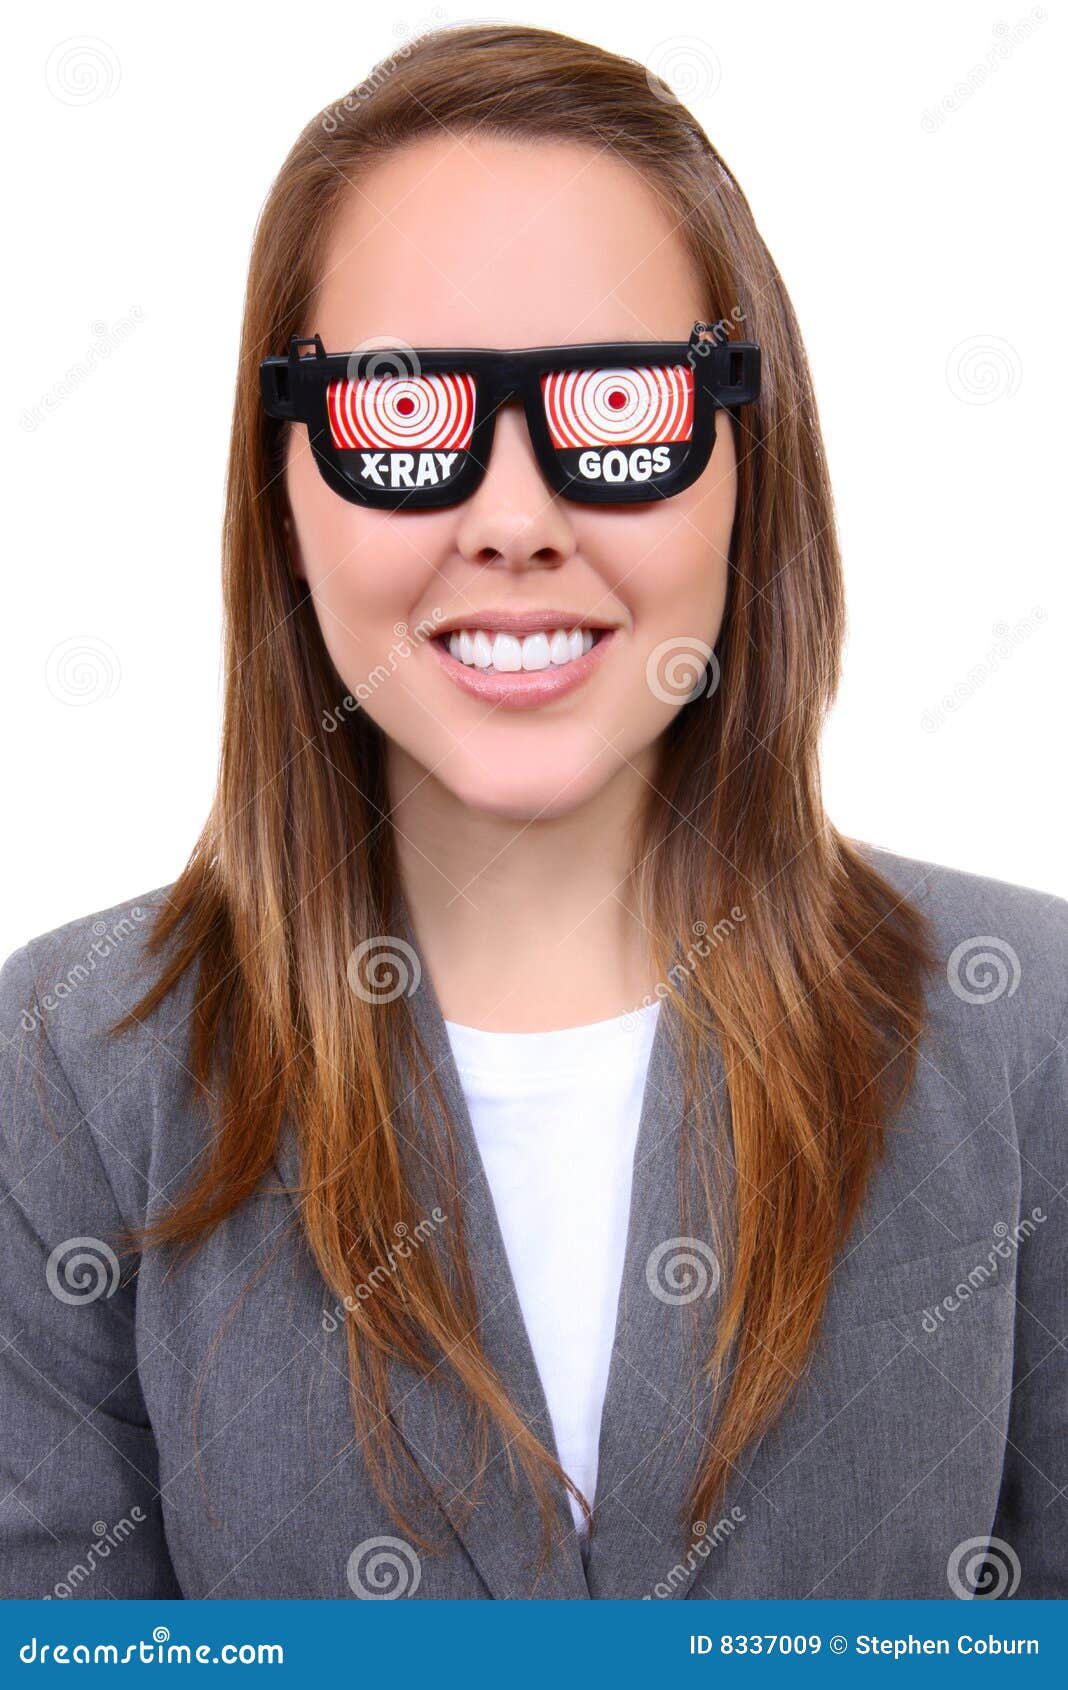 woman with x-ray glasses